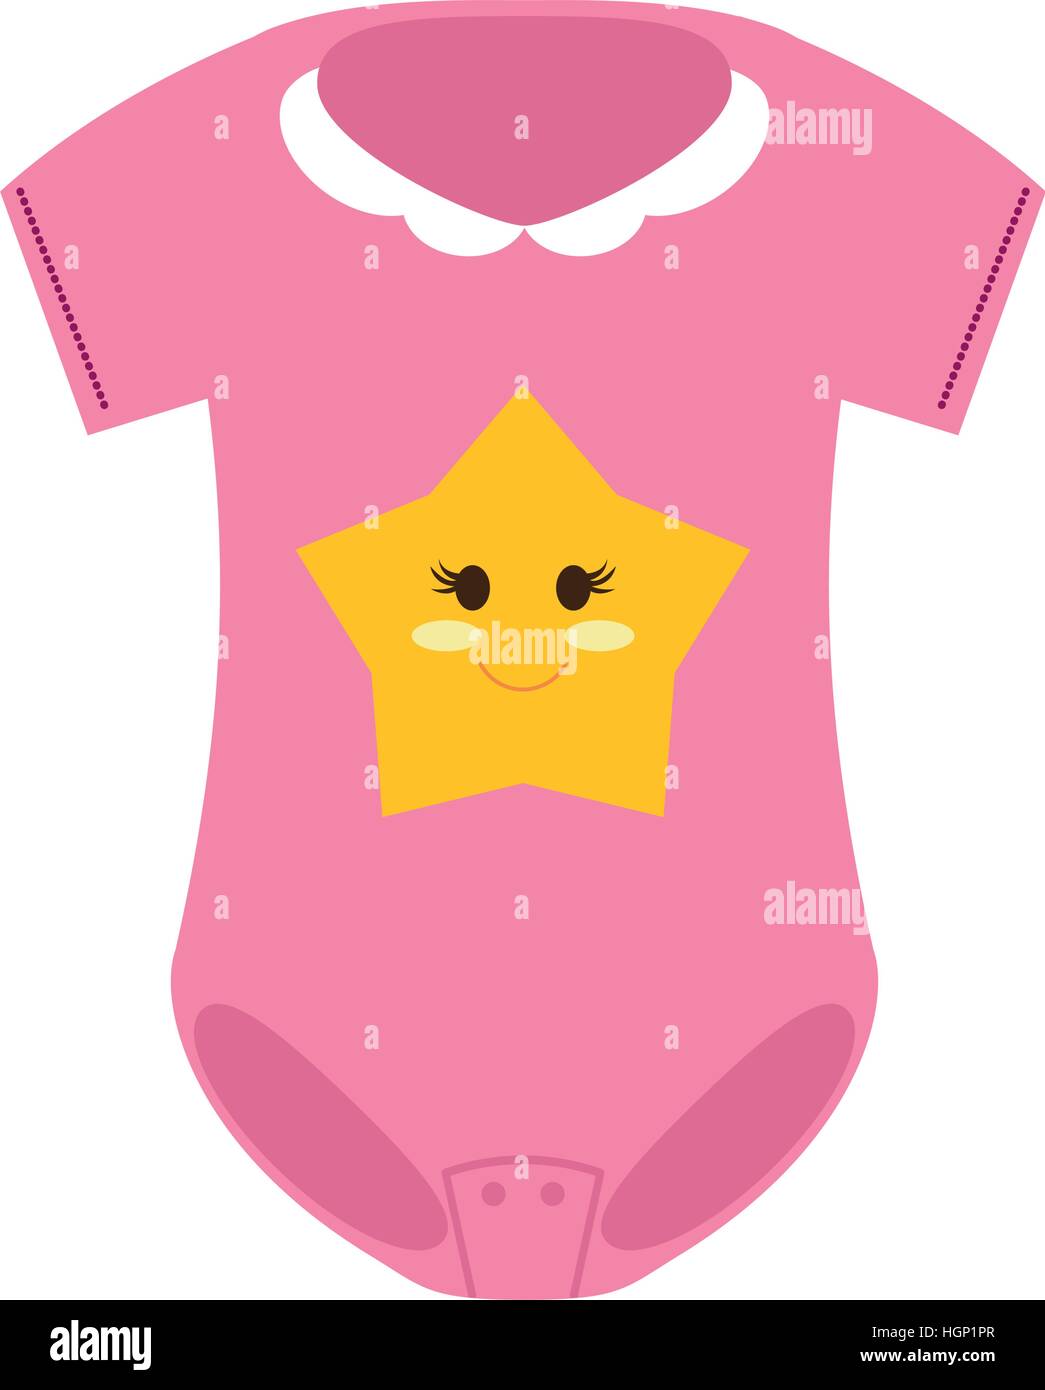 baby clothes with cute star icon over white background. colorful design ...